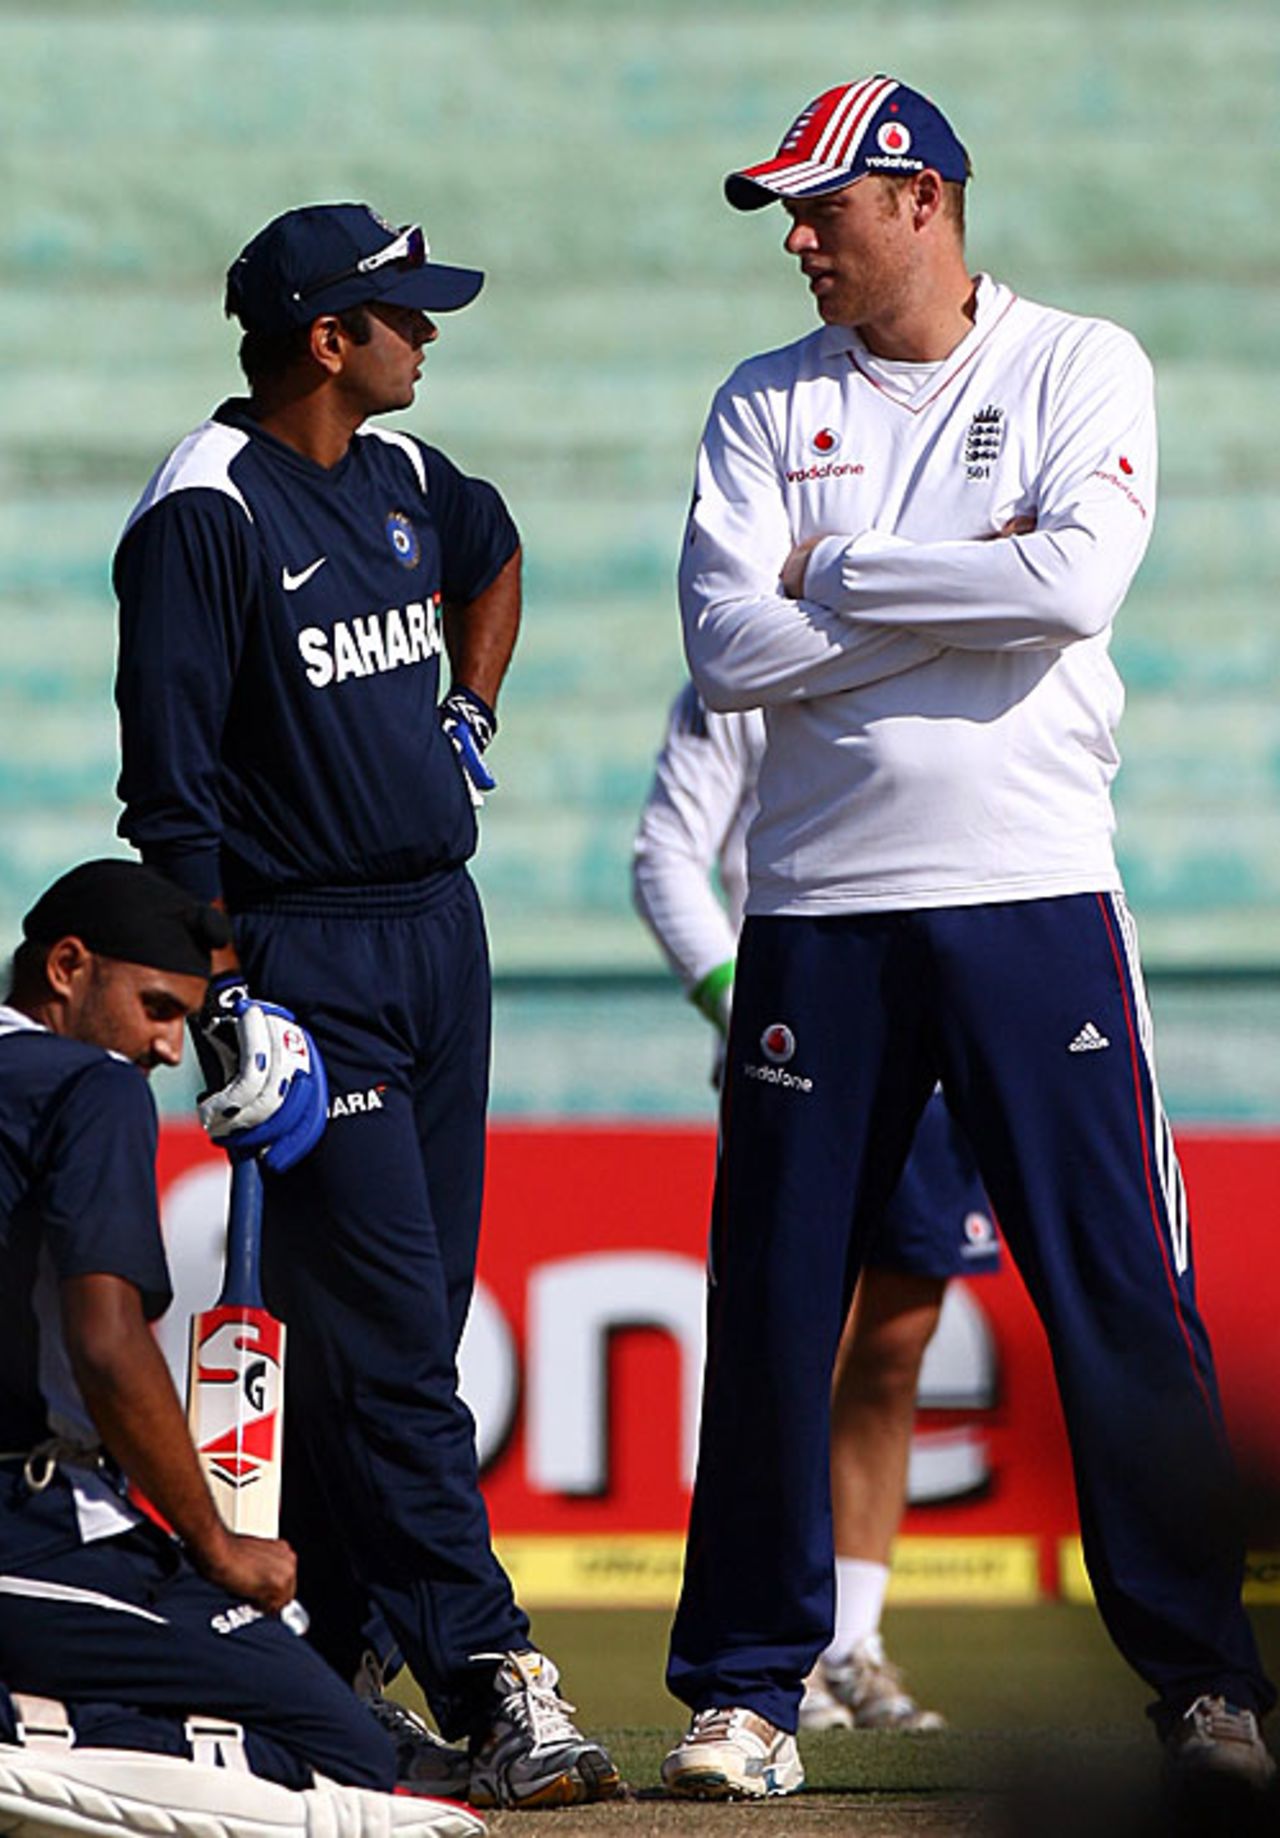 Andrew Flintoff has a chat with Rahul Dravid, Mohali, December 18, 2008